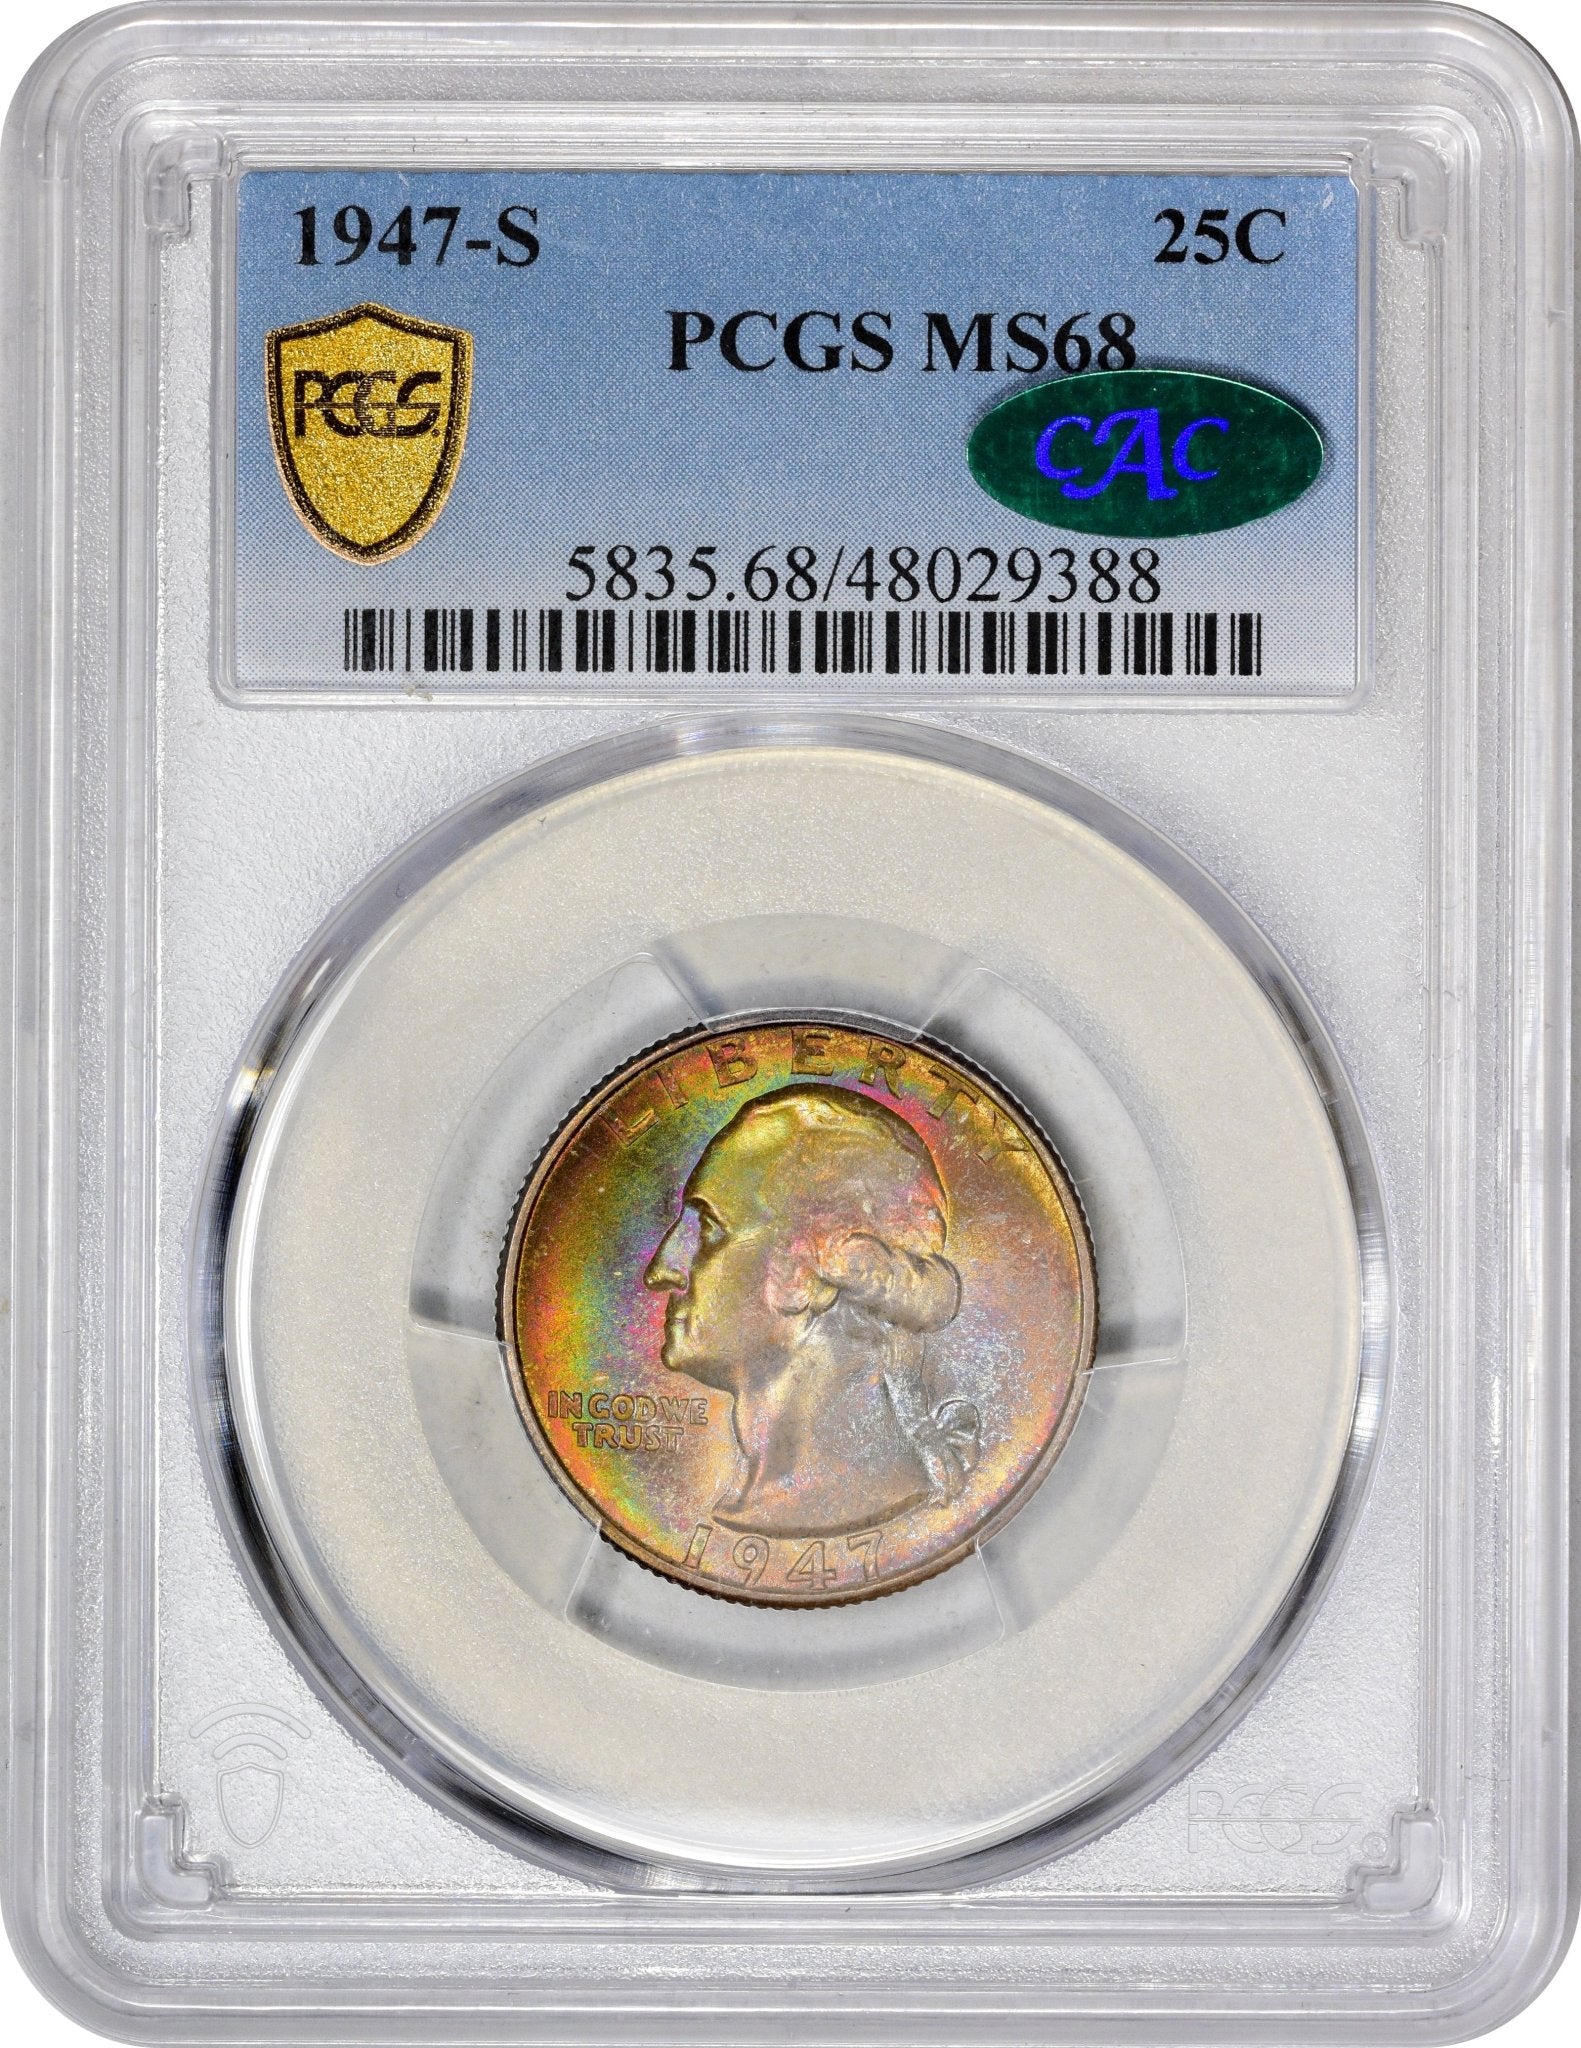 1947-S 25C MS68 PCGS CAC - Paradime Coins | PCGS NGC CACG CAC Rare US Numismatic Coins For Sale